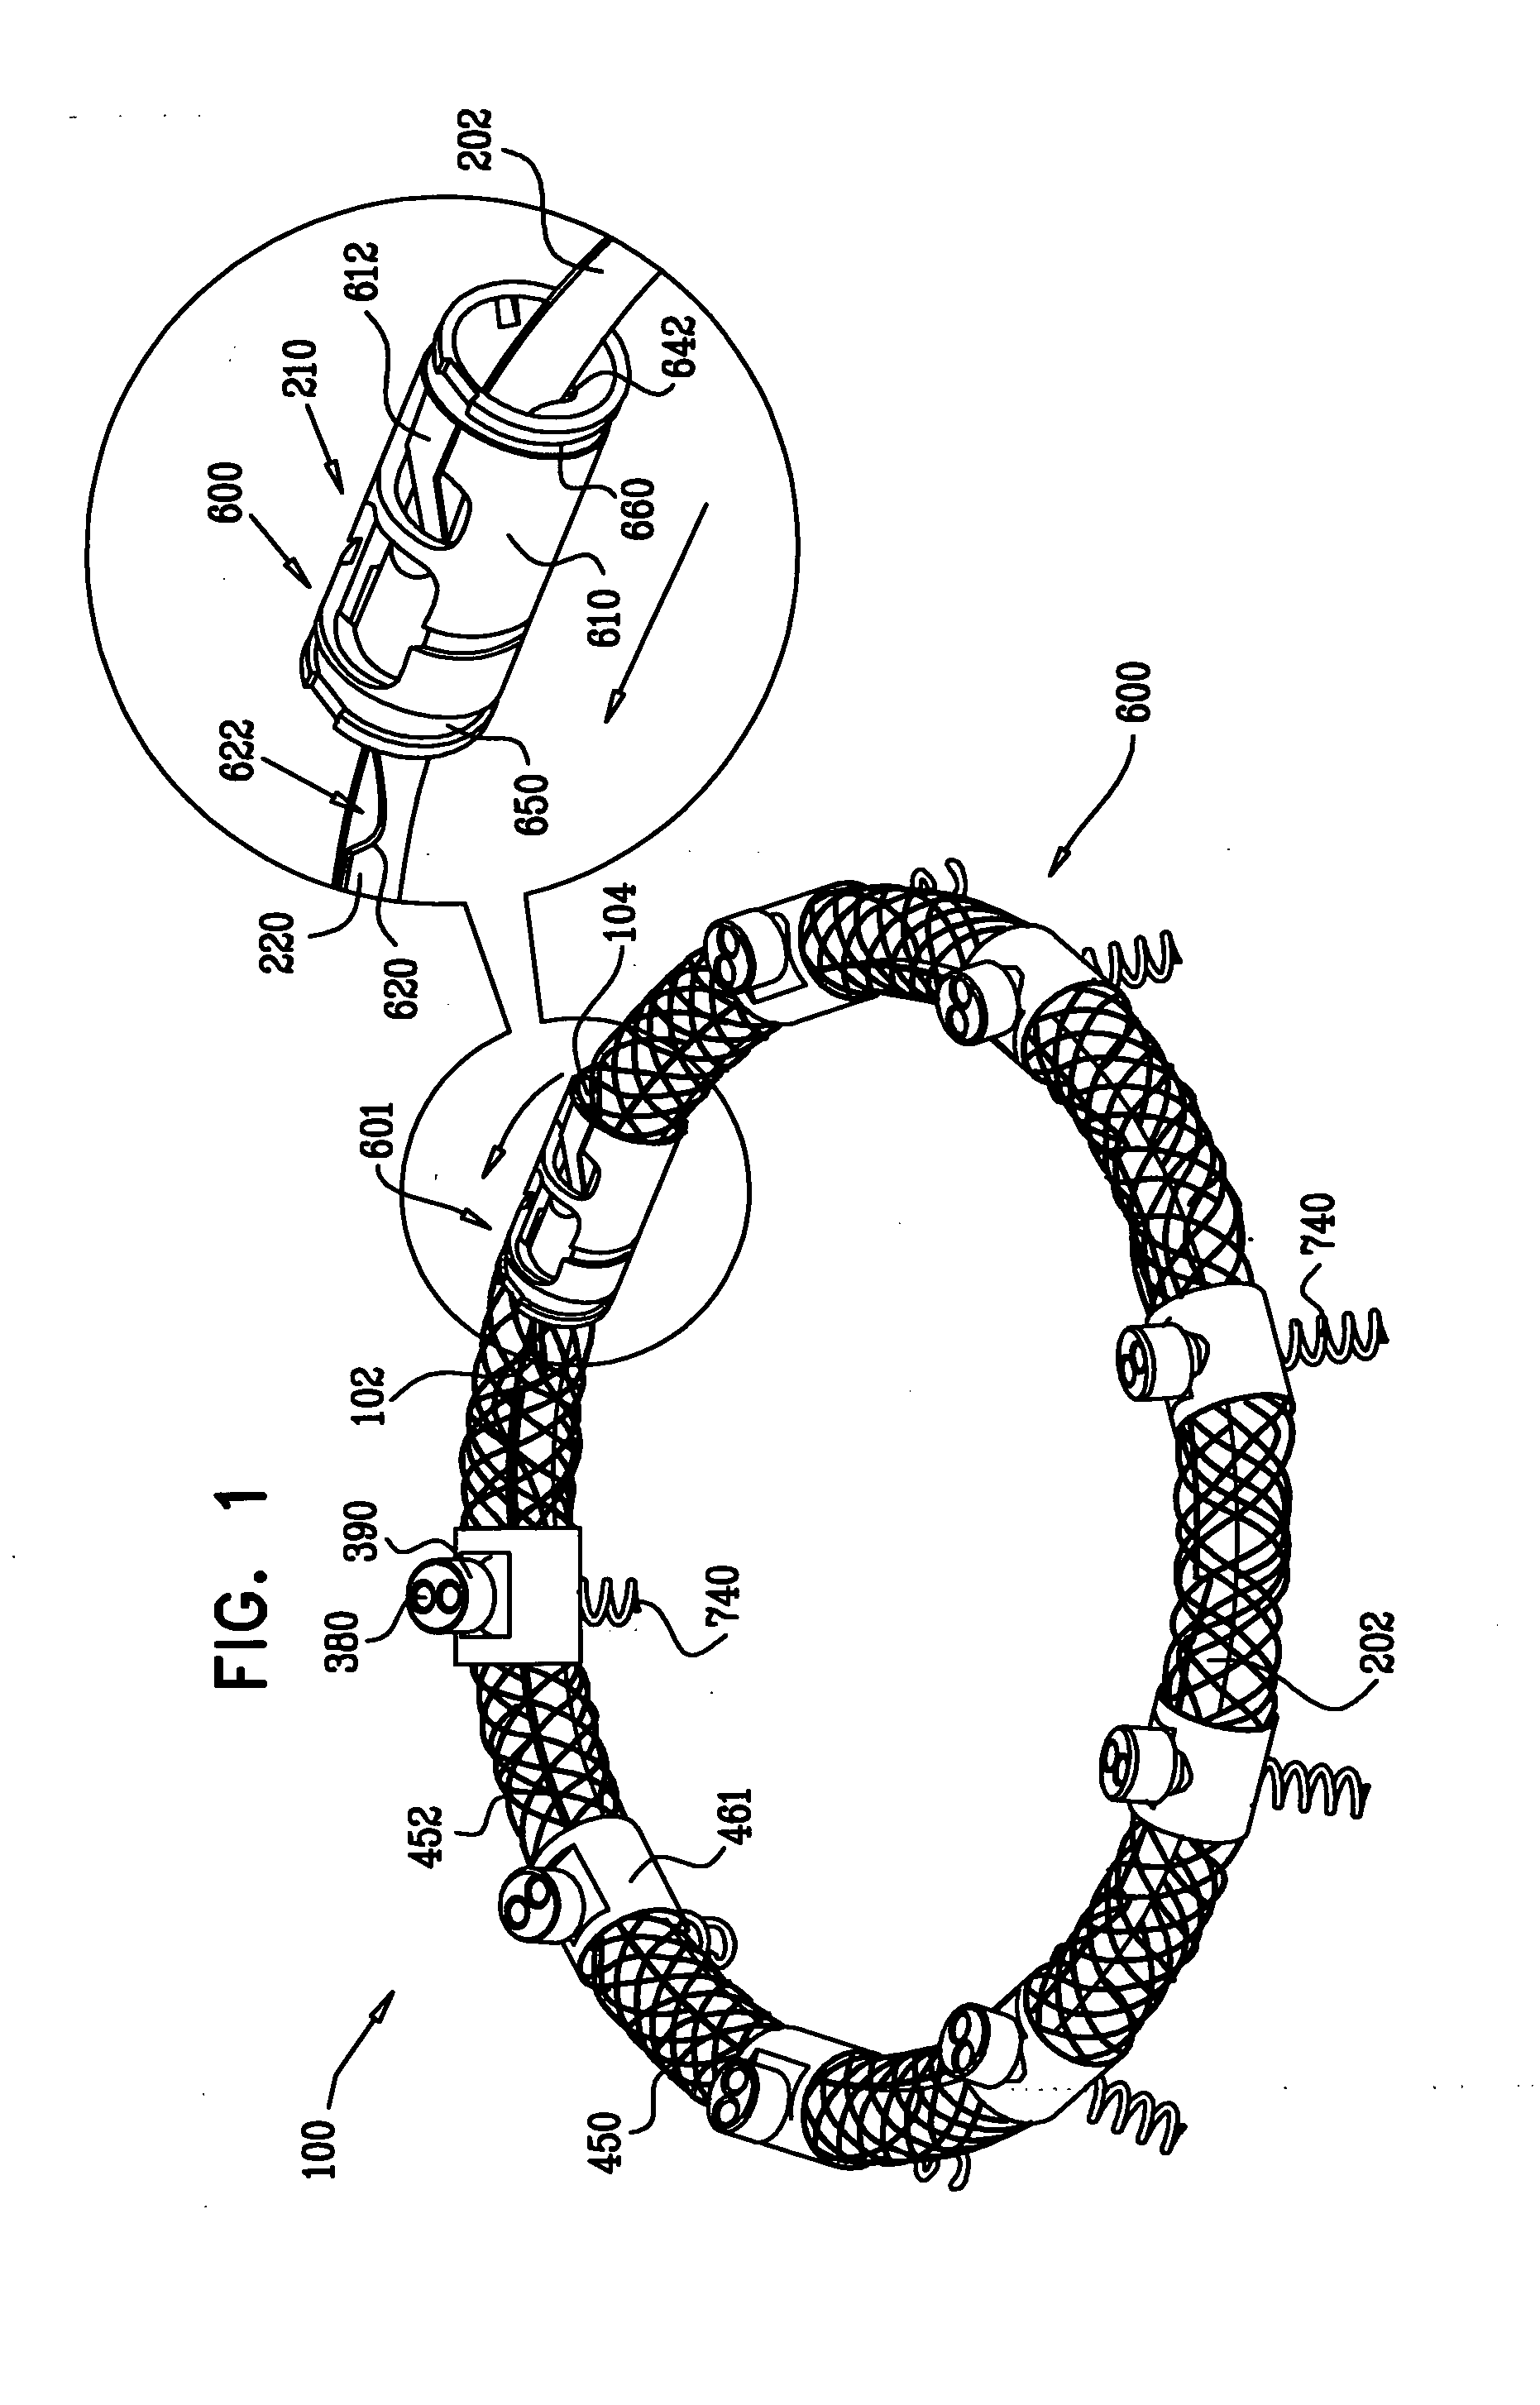 Annuloplasty devices and methods of deliver therefor